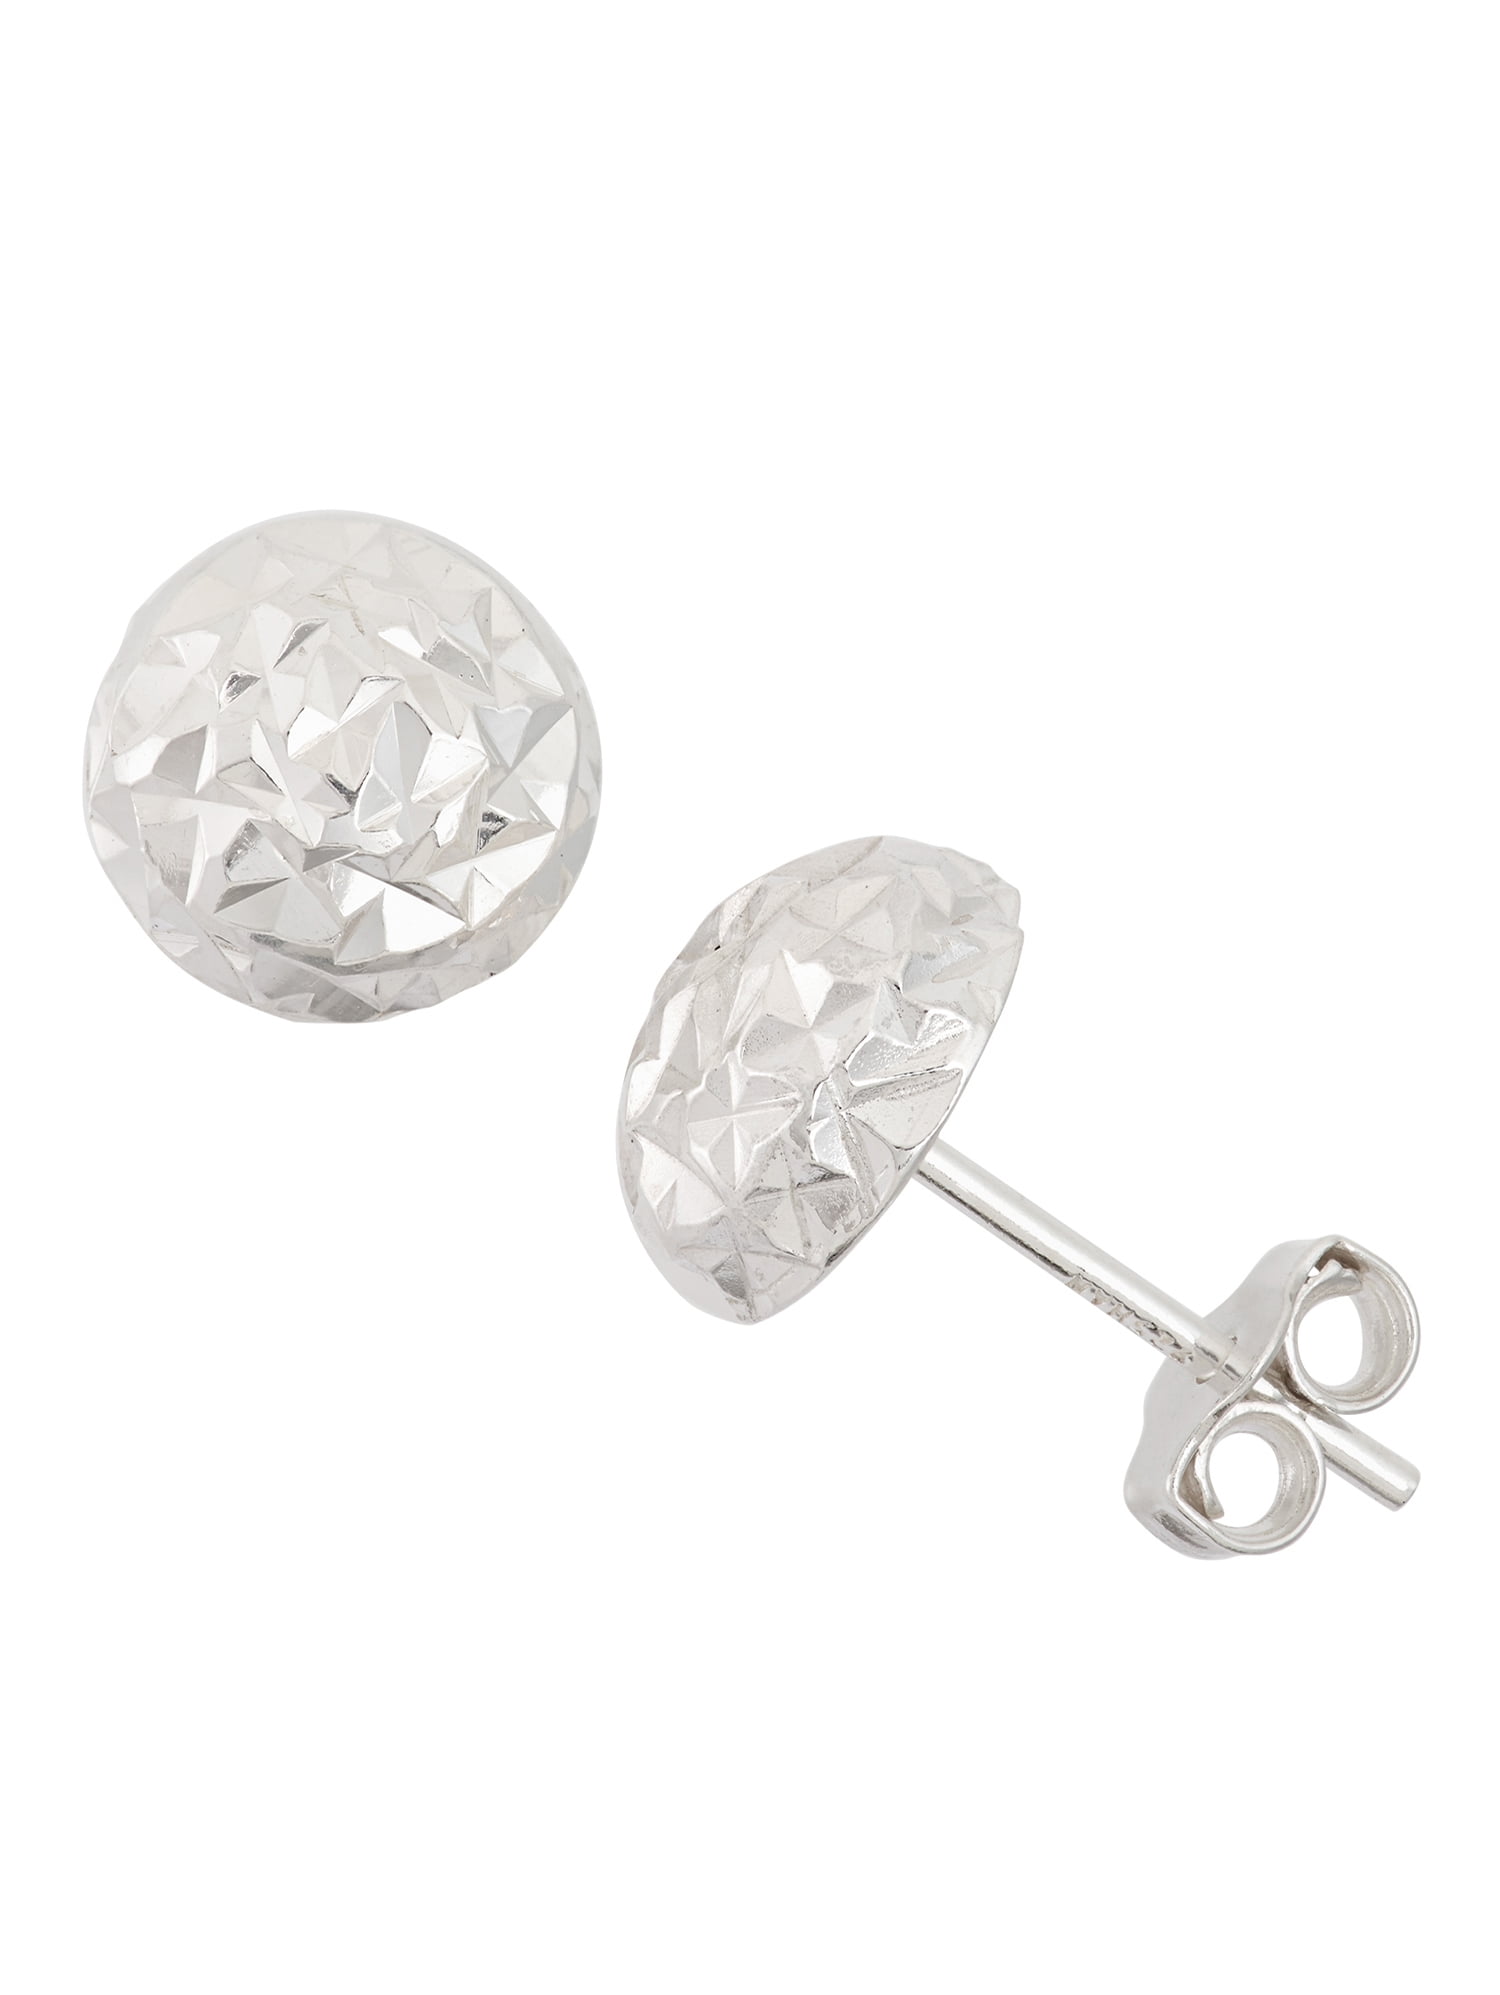 Sterling Silver Rhodium Plated 10mm Sparkle-Cut Half Ball Post Earrings 